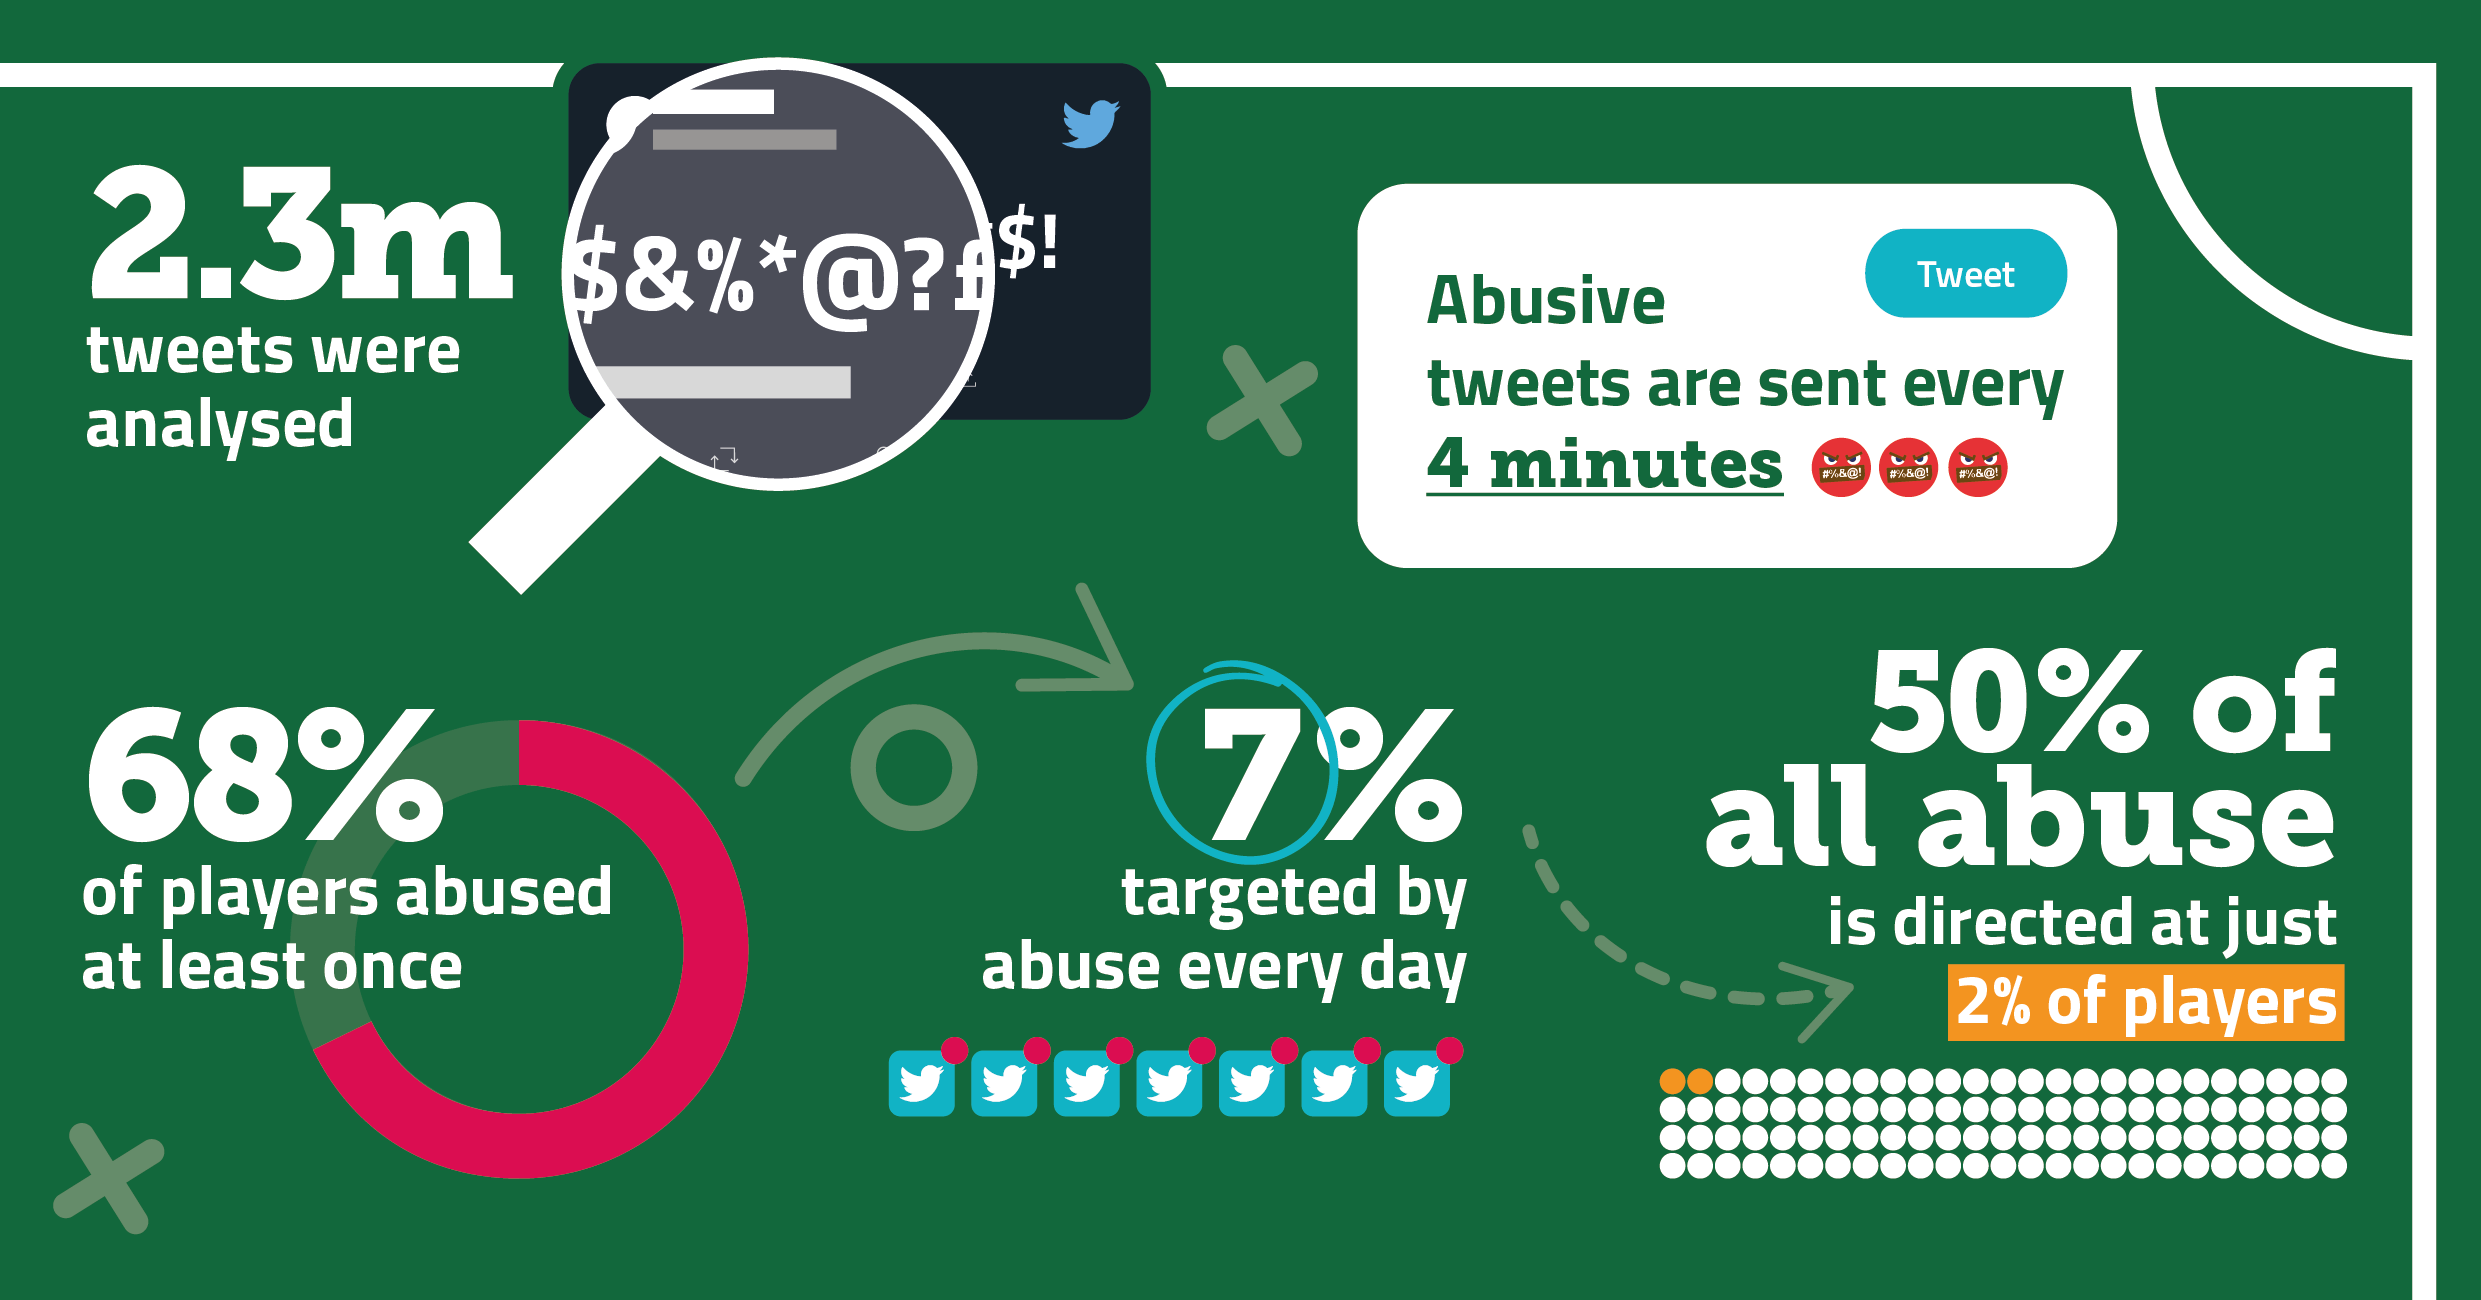 2.3 million tweets analysed  7 in 10 players have been targeted by abusive tweets  Abusive tweet sent every 4 minutes  50% of all abuse is directed at just 2% of players  1 in 14 targeted by abuse every day